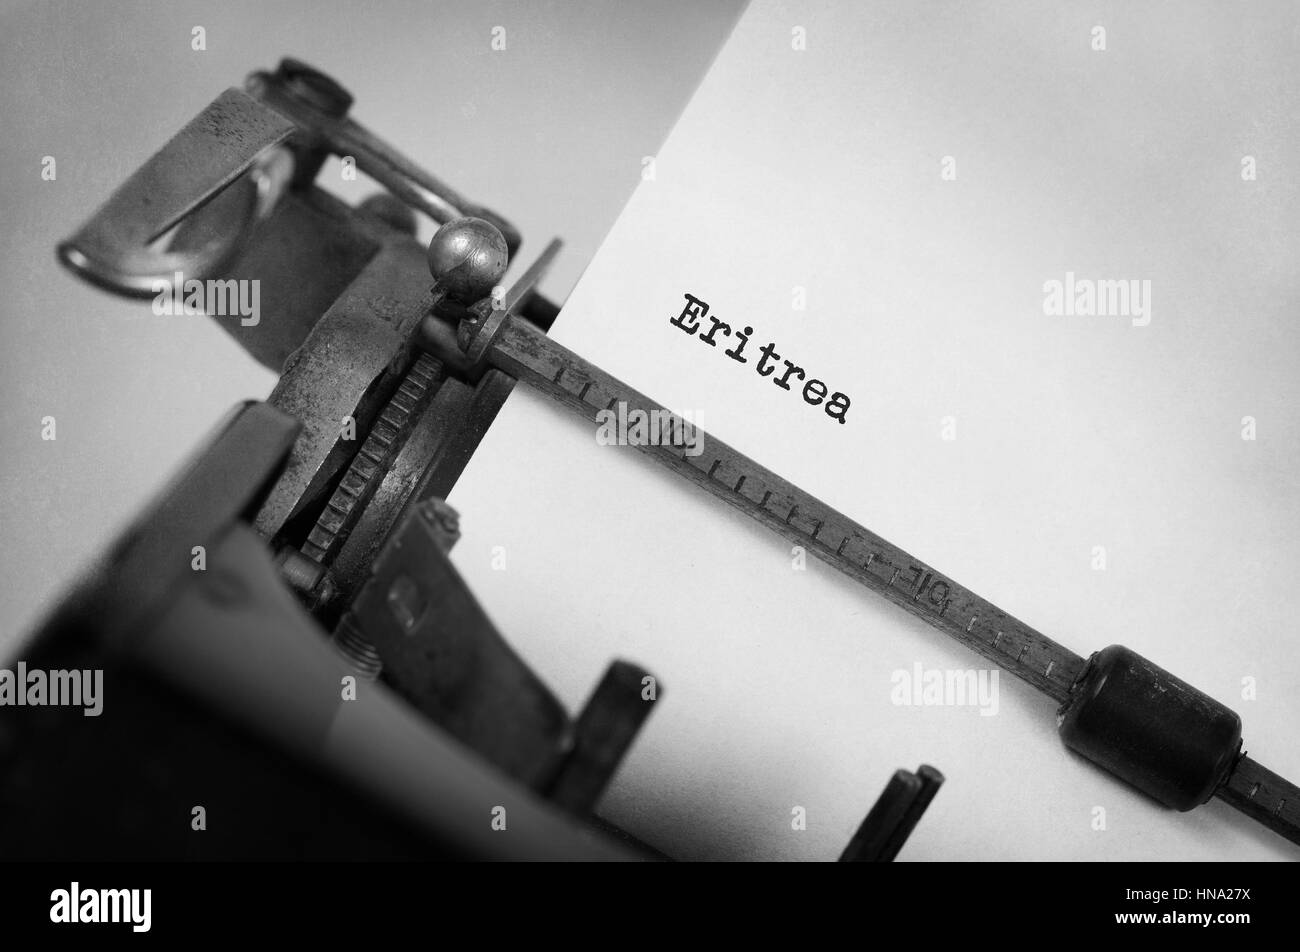 Inscription made by vinrage typewriter, country, Eritrea Stock Photo